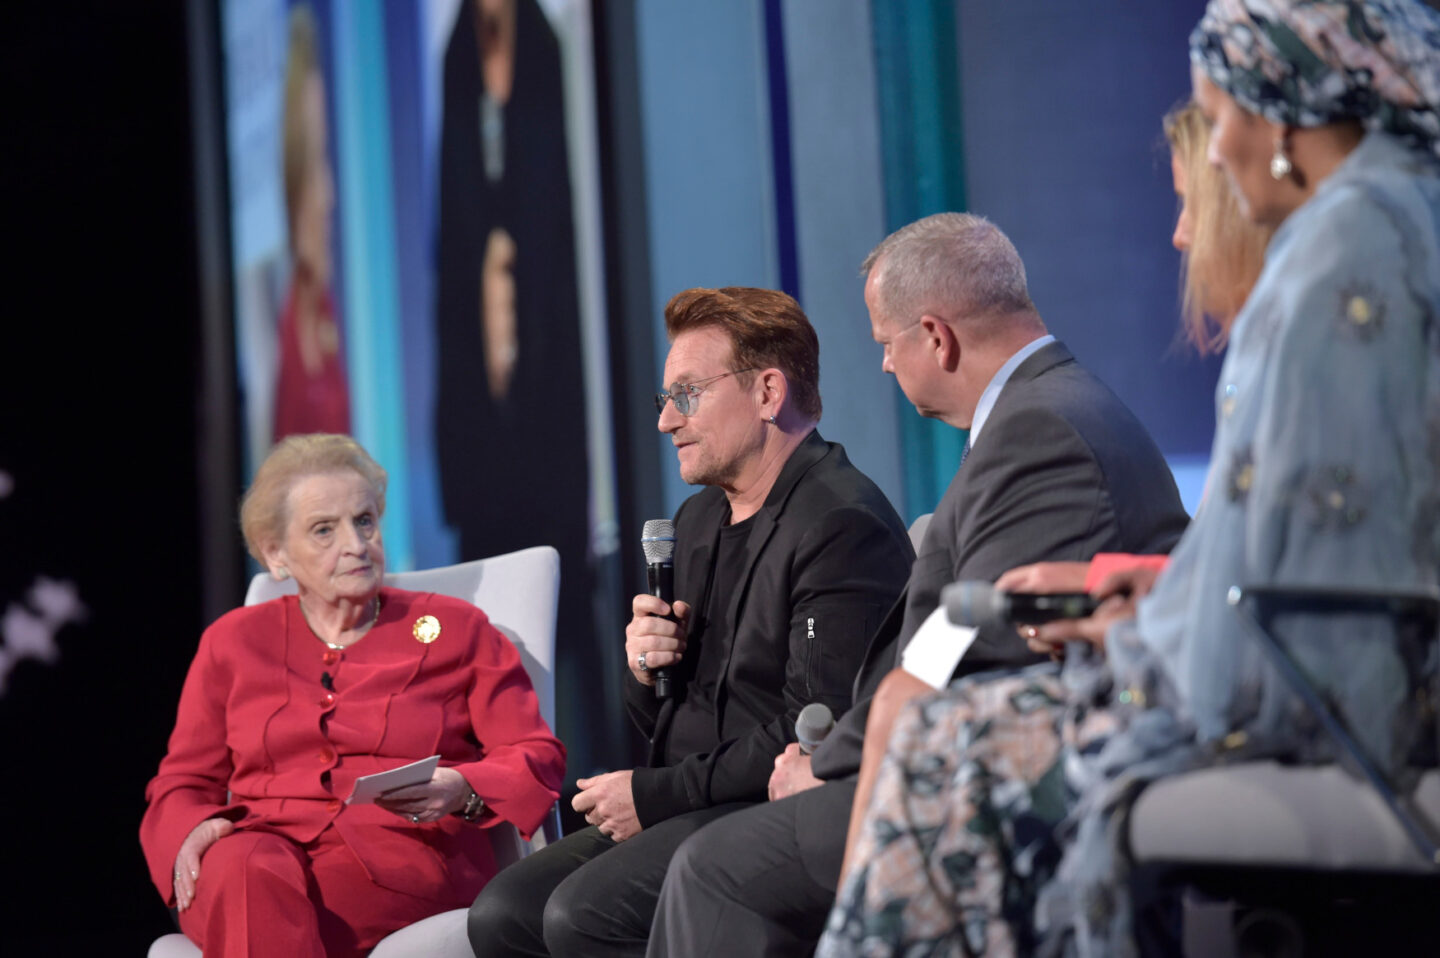 Bono speaks on stage during a plenary session